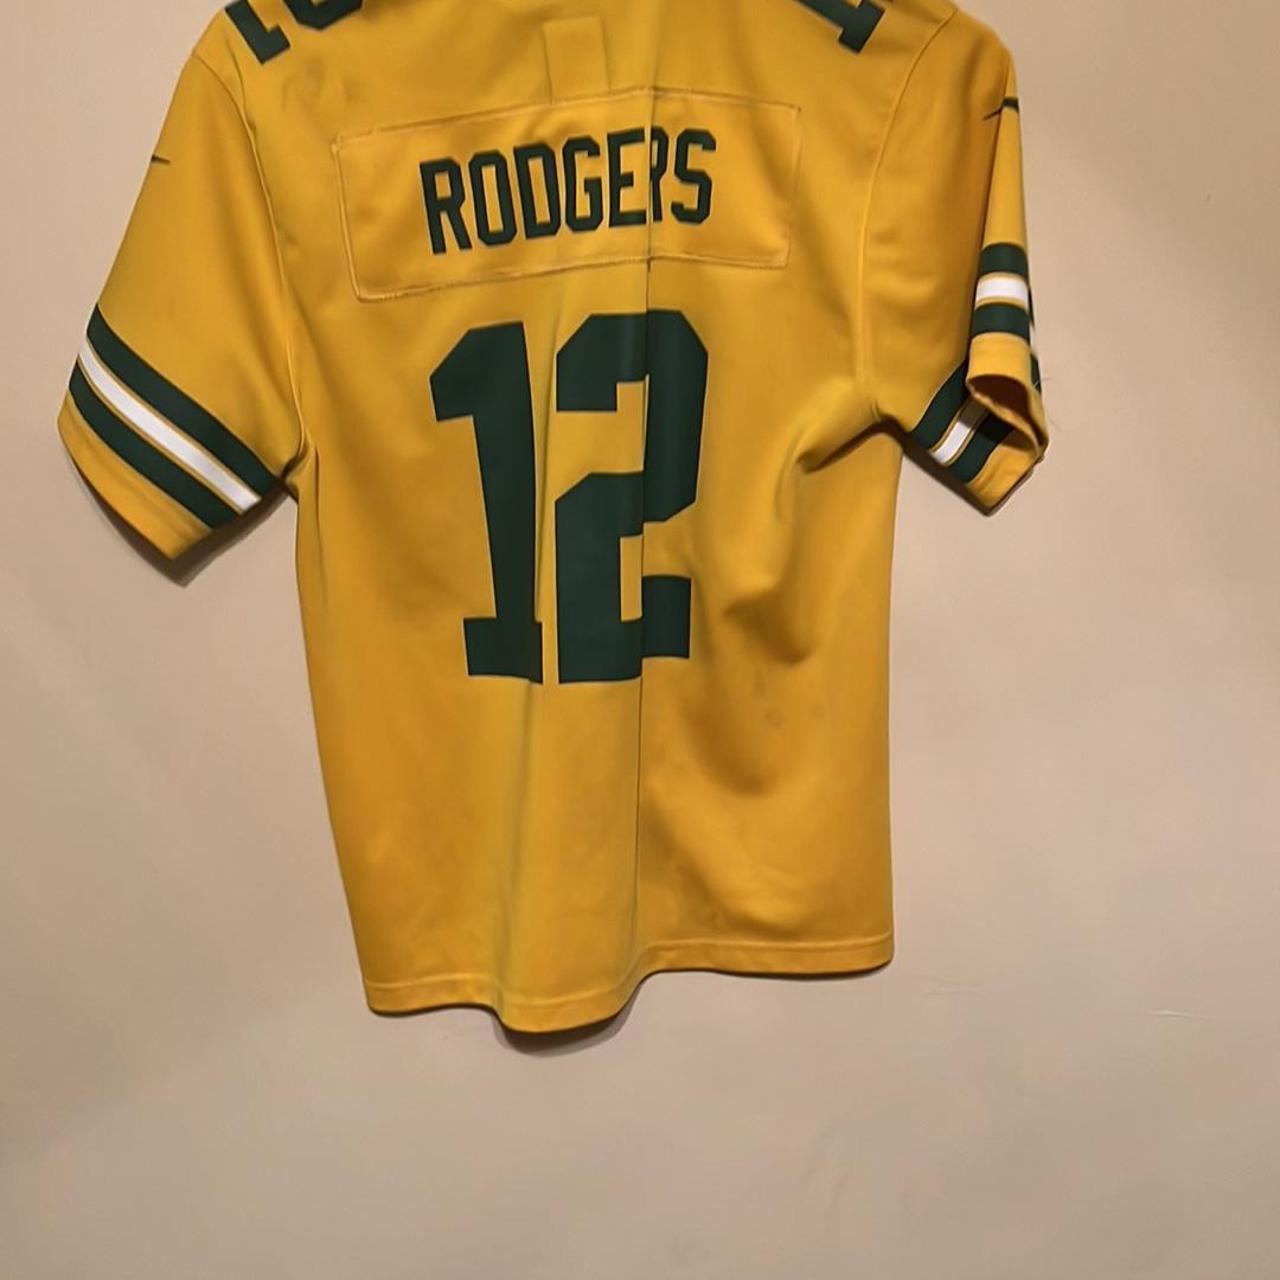 Nike Green Bay Packers Aaron Rodgers #12 NFL Jersey Men Large V-Neck White  Green